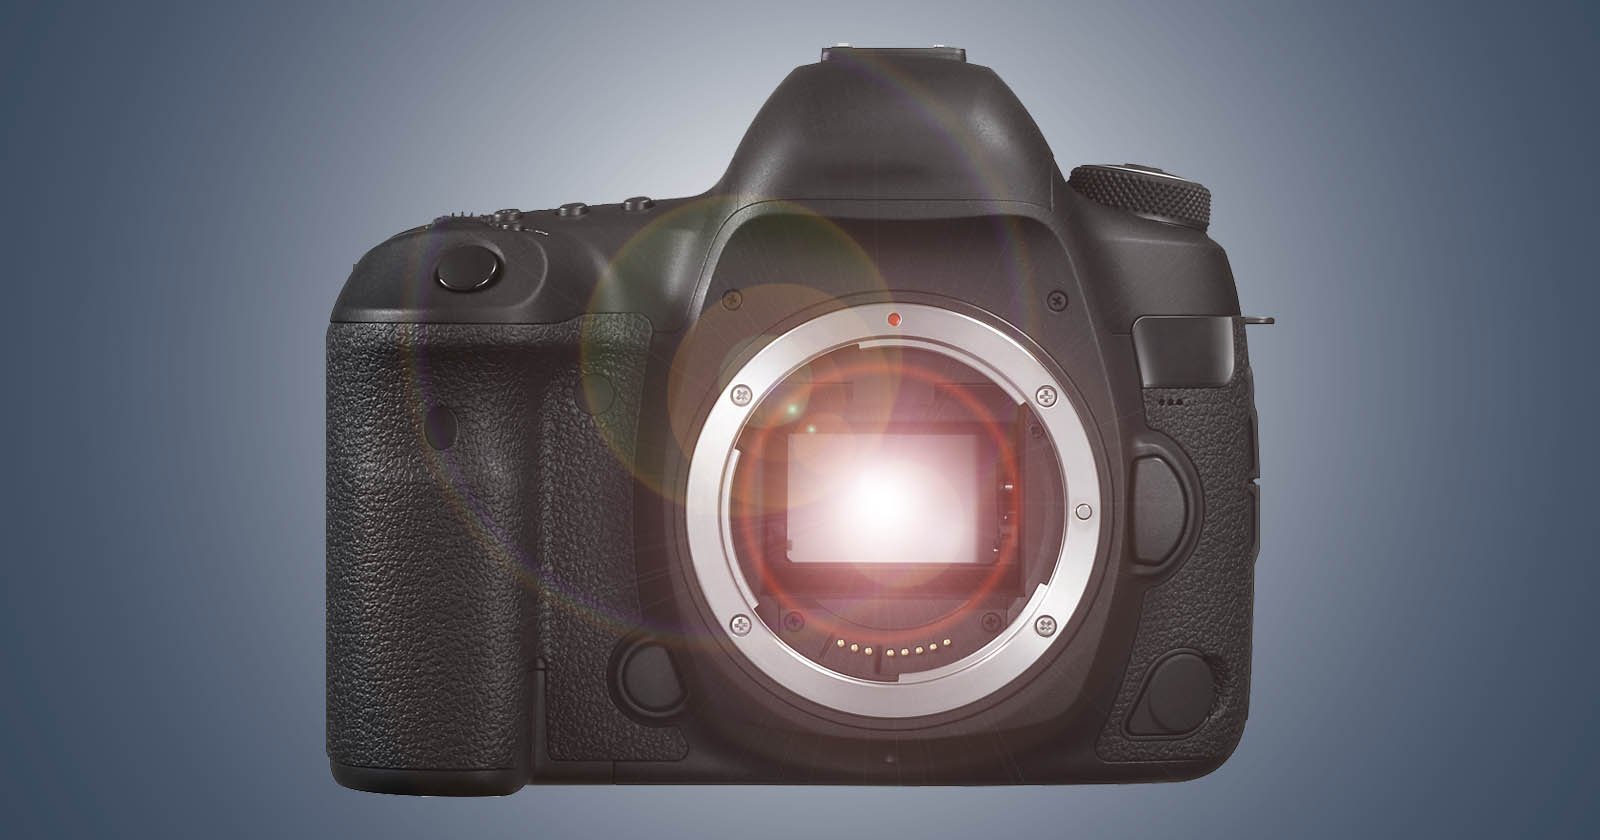 No, The DSLR is Not Dead Yet, So Stop Asking and Just Take the Picture